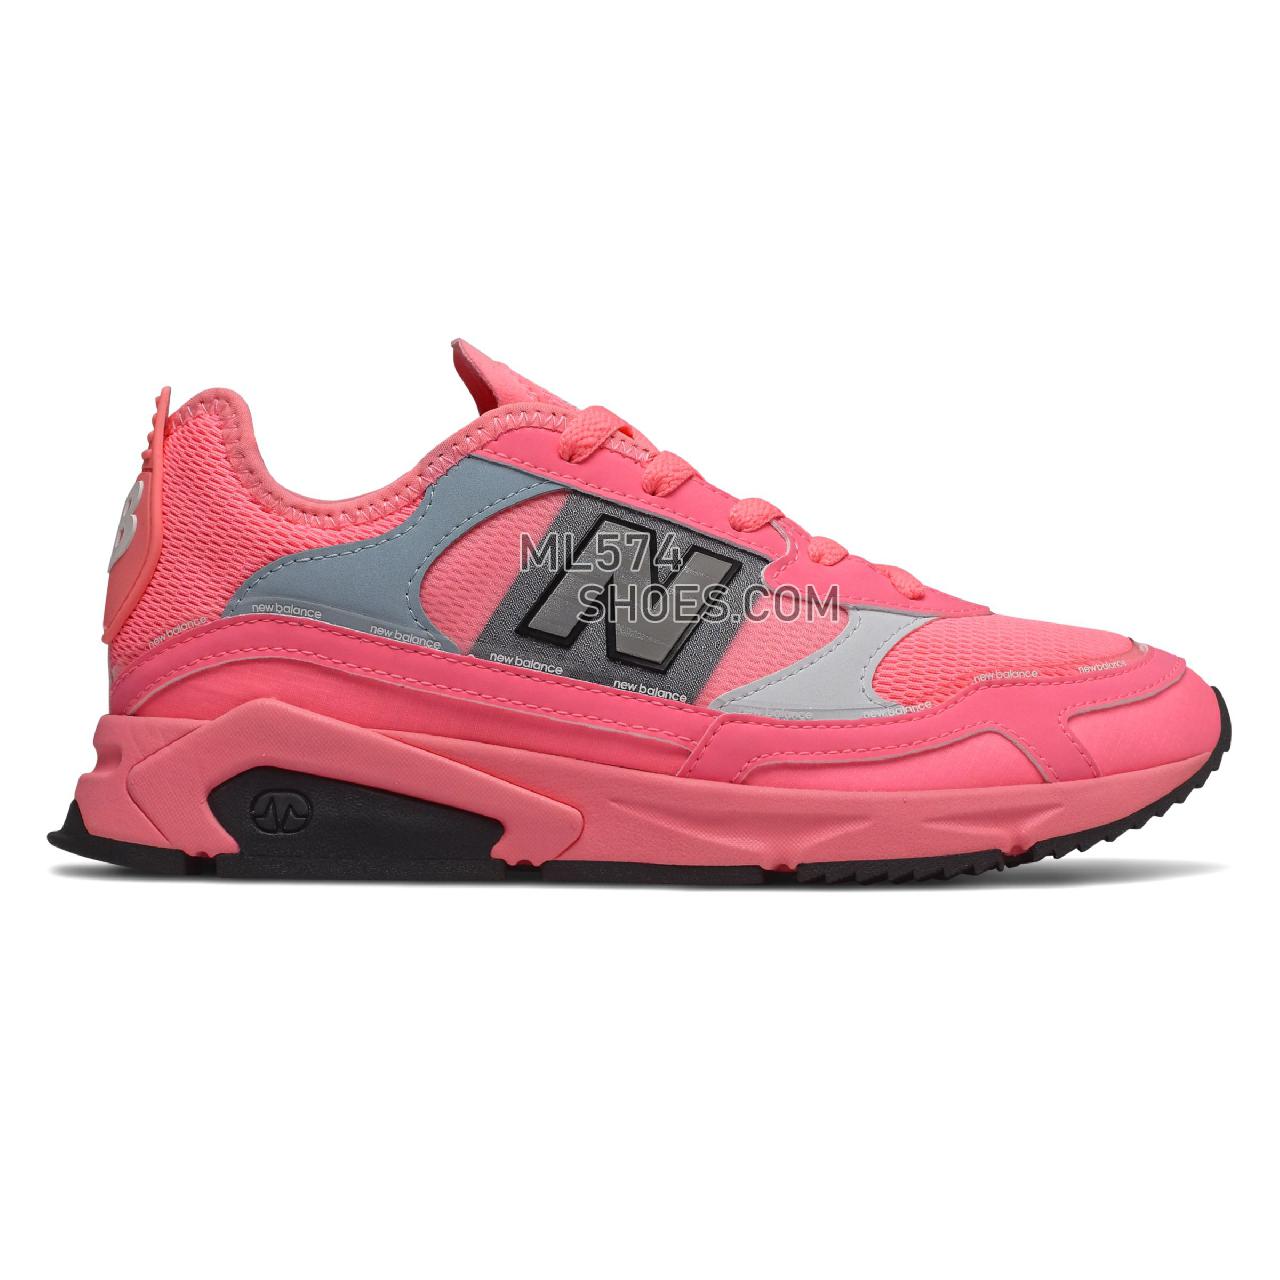 New Balance X-Racer - Women's Sport Style Sneakers - Bleached Guava with Winter Sky - WSXRCHFA